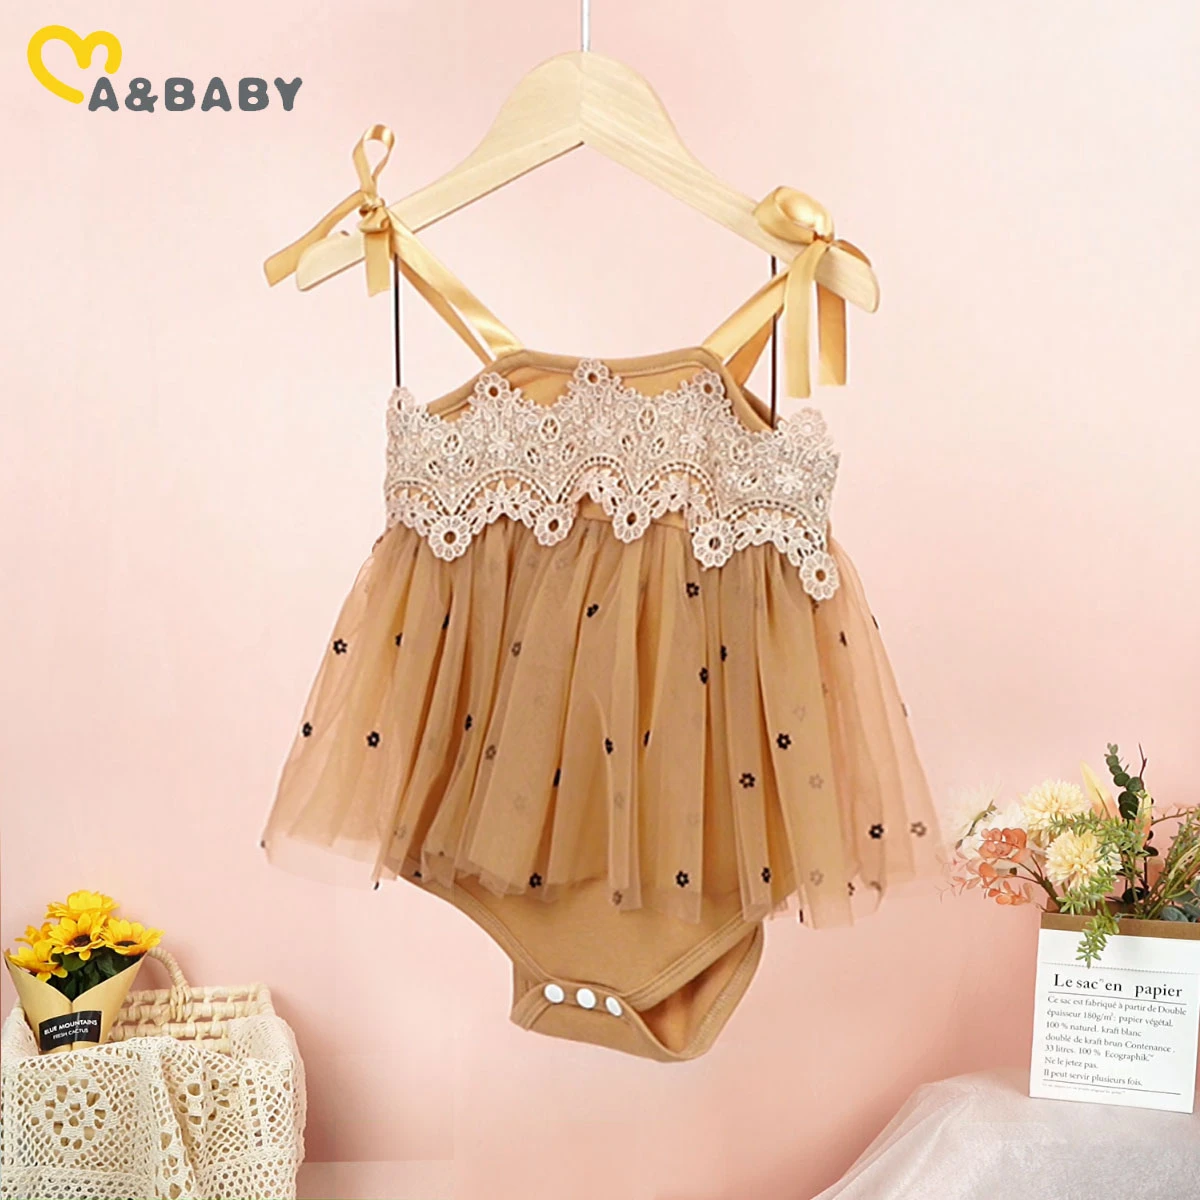 Warm Baby Bodysuits  ma&baby 0-24M Newborn Infant Baby Girls Romper Lace Bow Sleeveless Jumpsuit Playsuit Summer Clothing Floral Print Sunsuit Bamboo fiber children's clothes